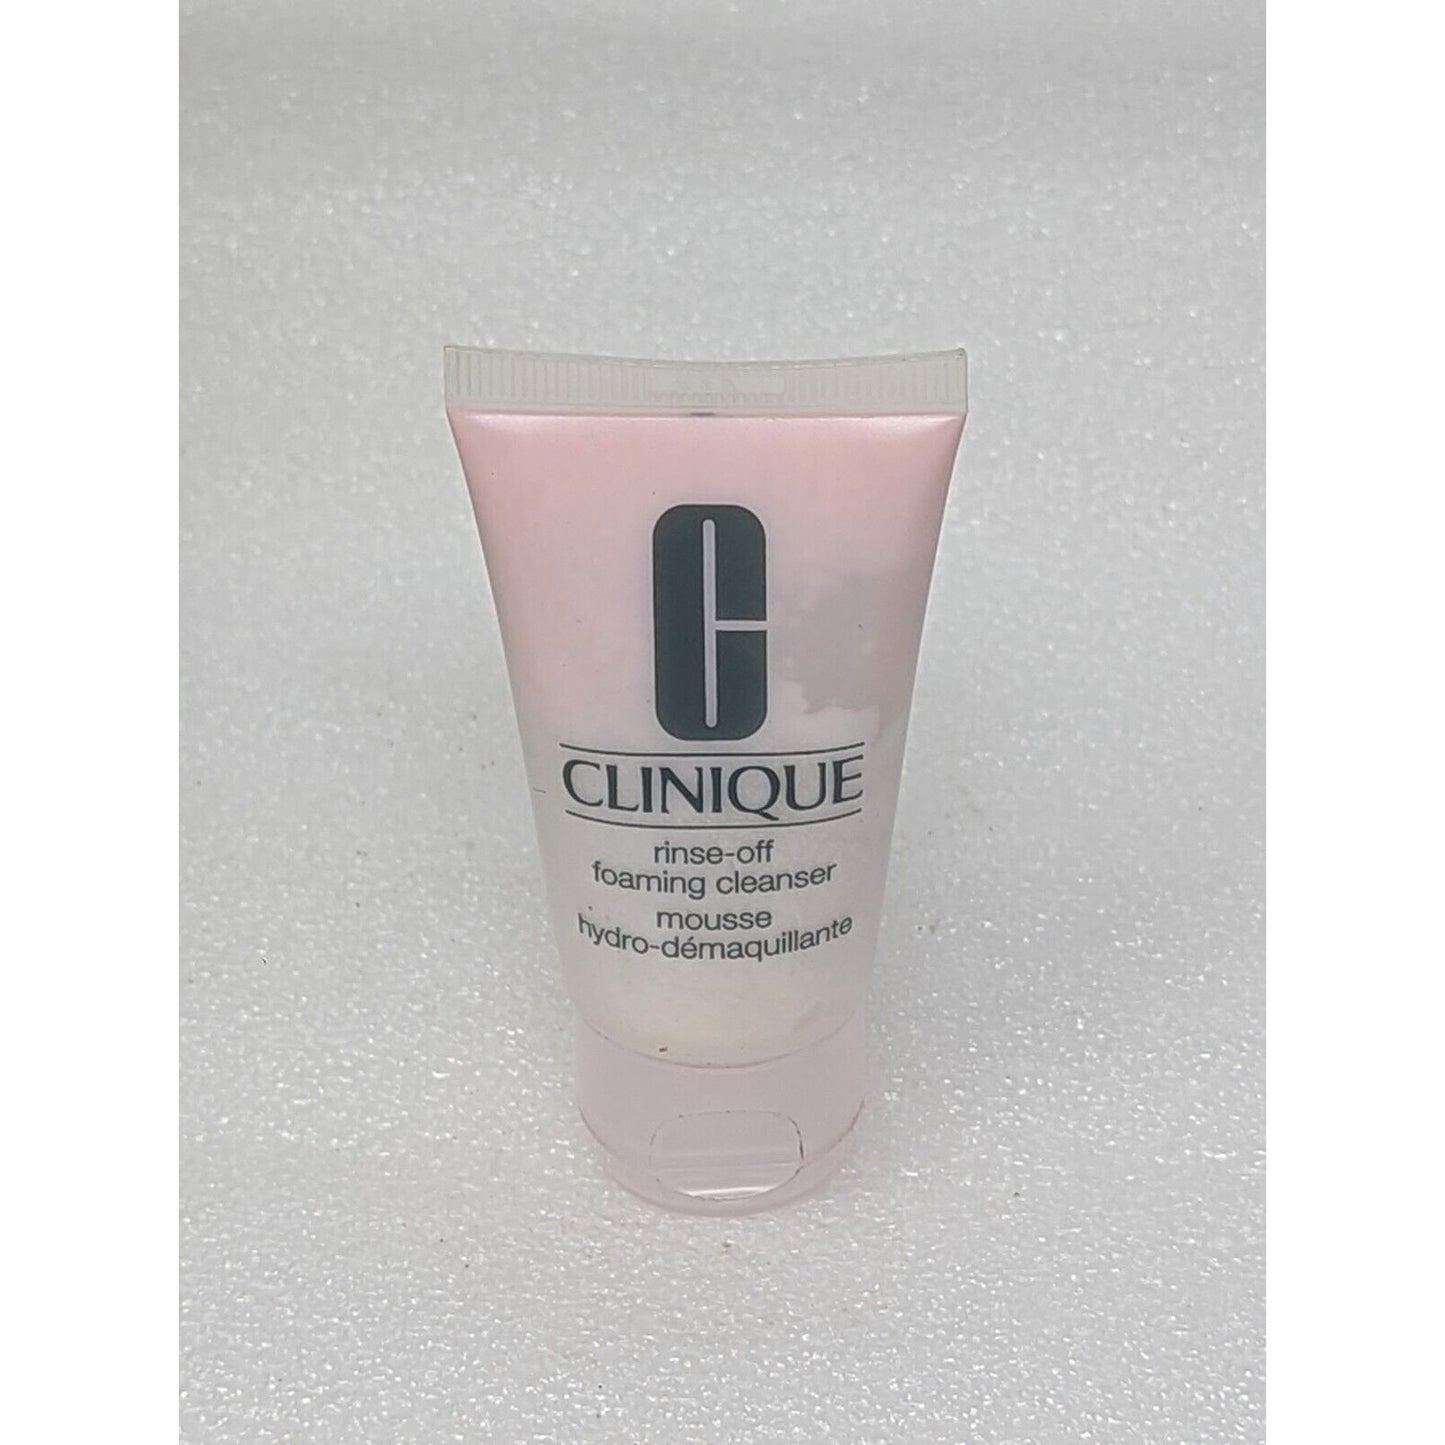 Clinique Rinse Off Foaming Cleanser 1 oz / 30 ml Travel Size